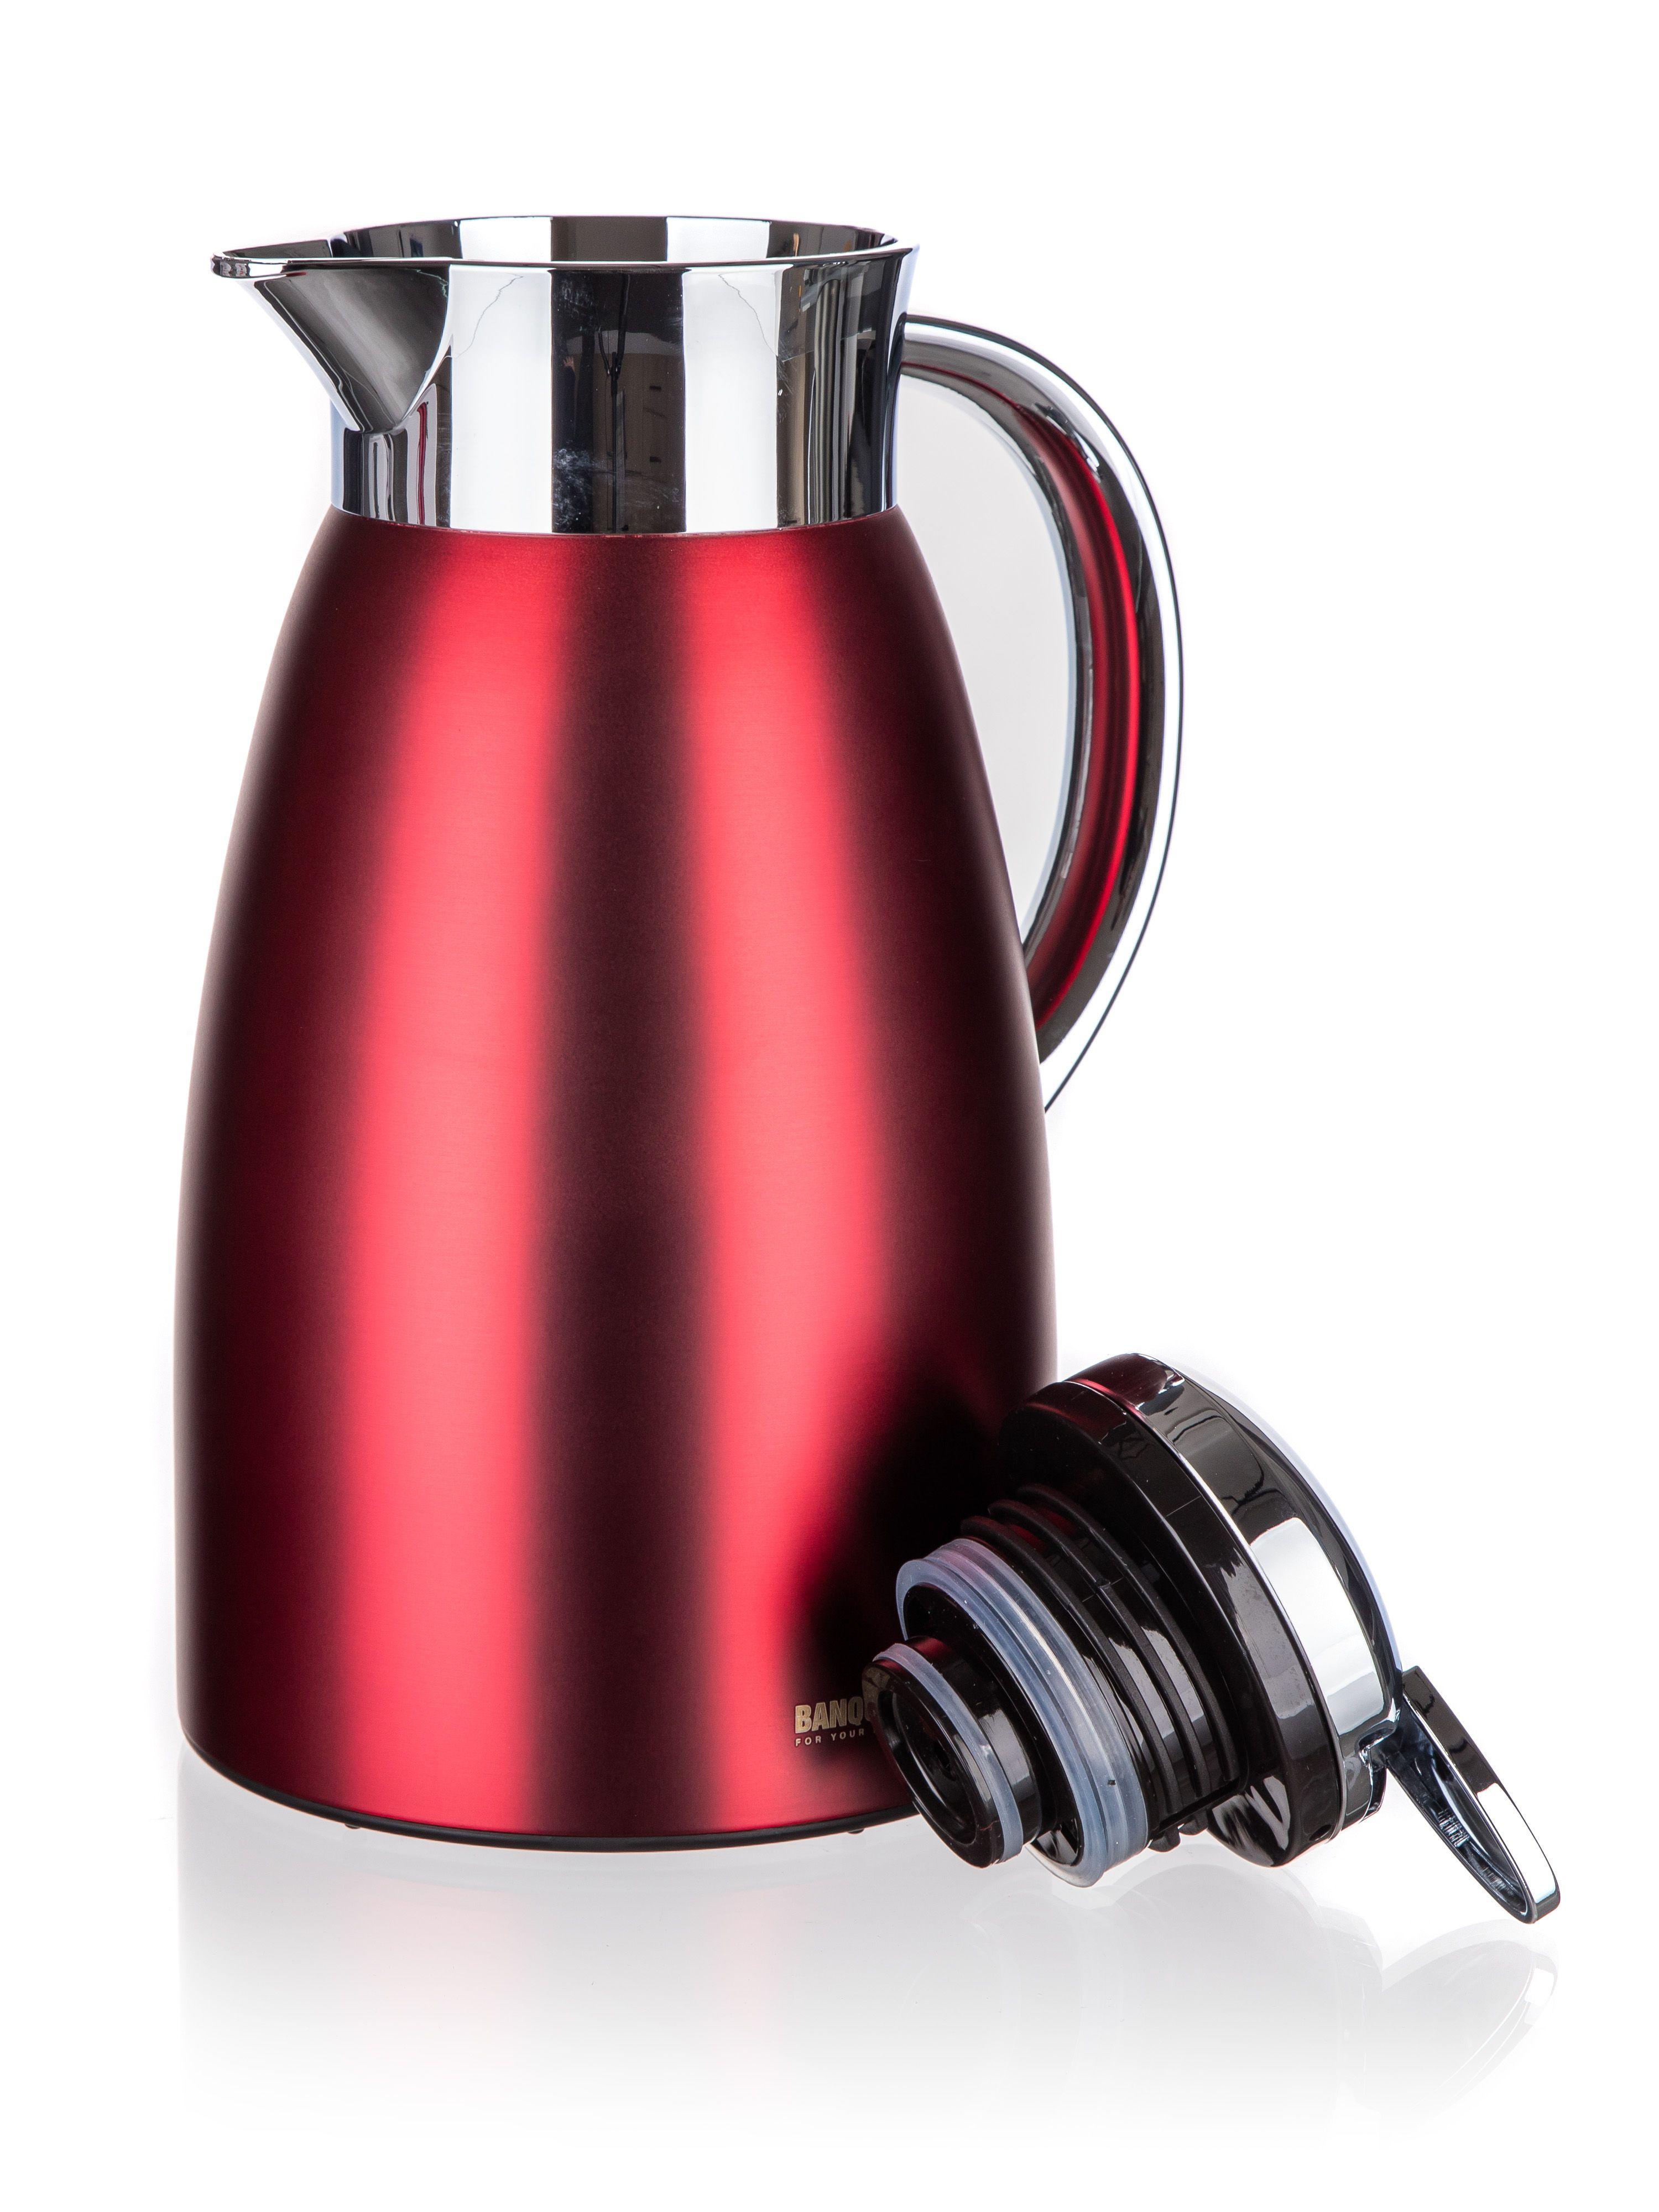 METALLIC Red 1,5 l stainless steel double wall kettle